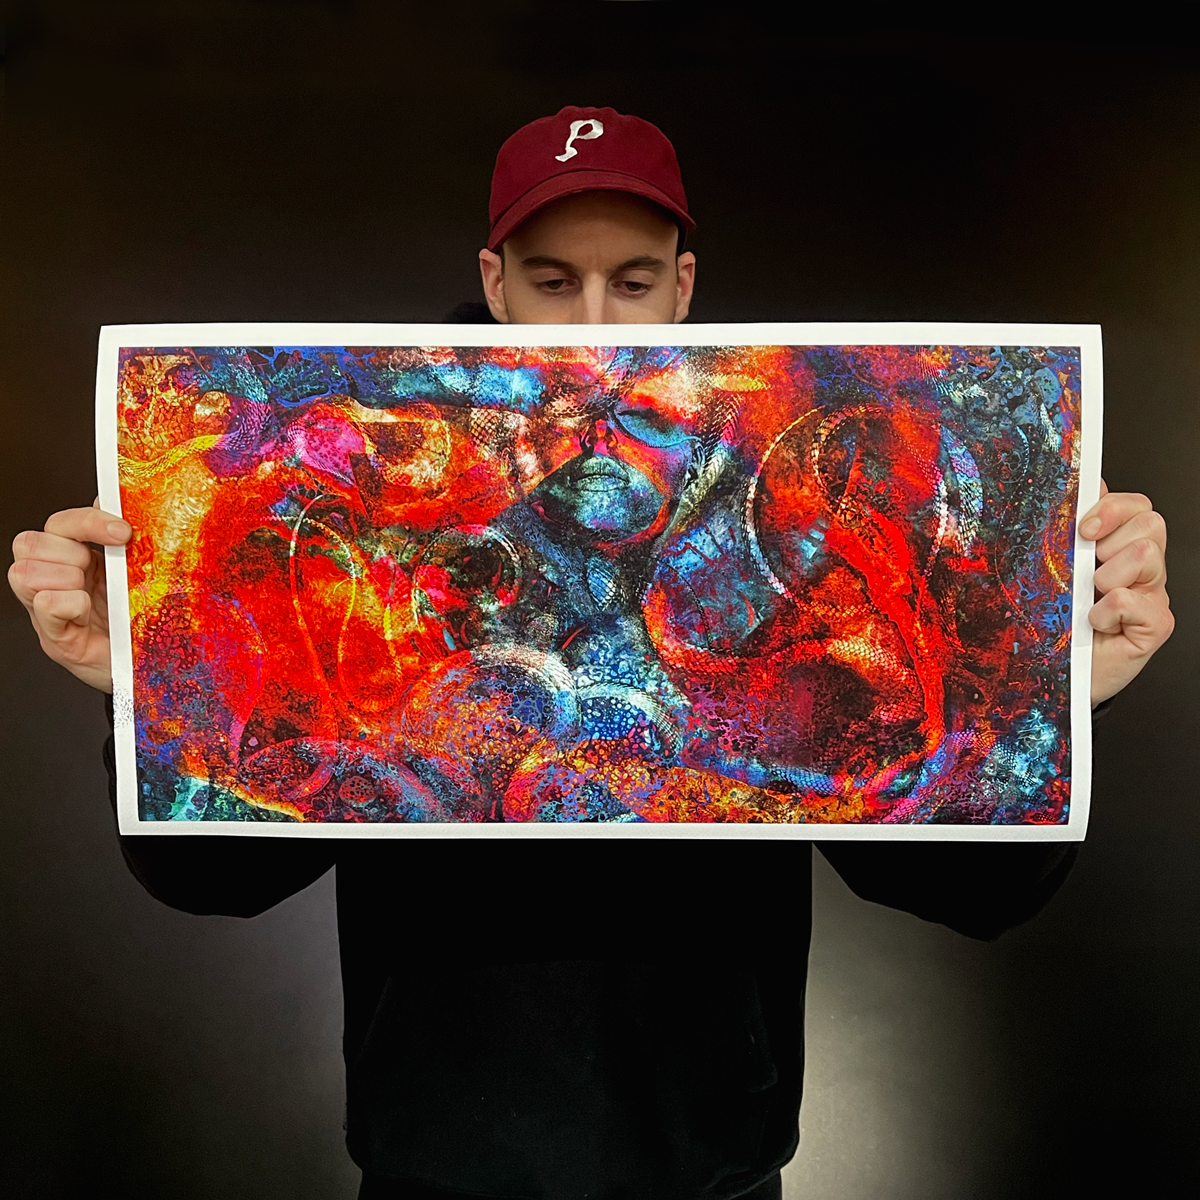 J. Bannon "Bloodmoon: I" (Complete) Giclee Print